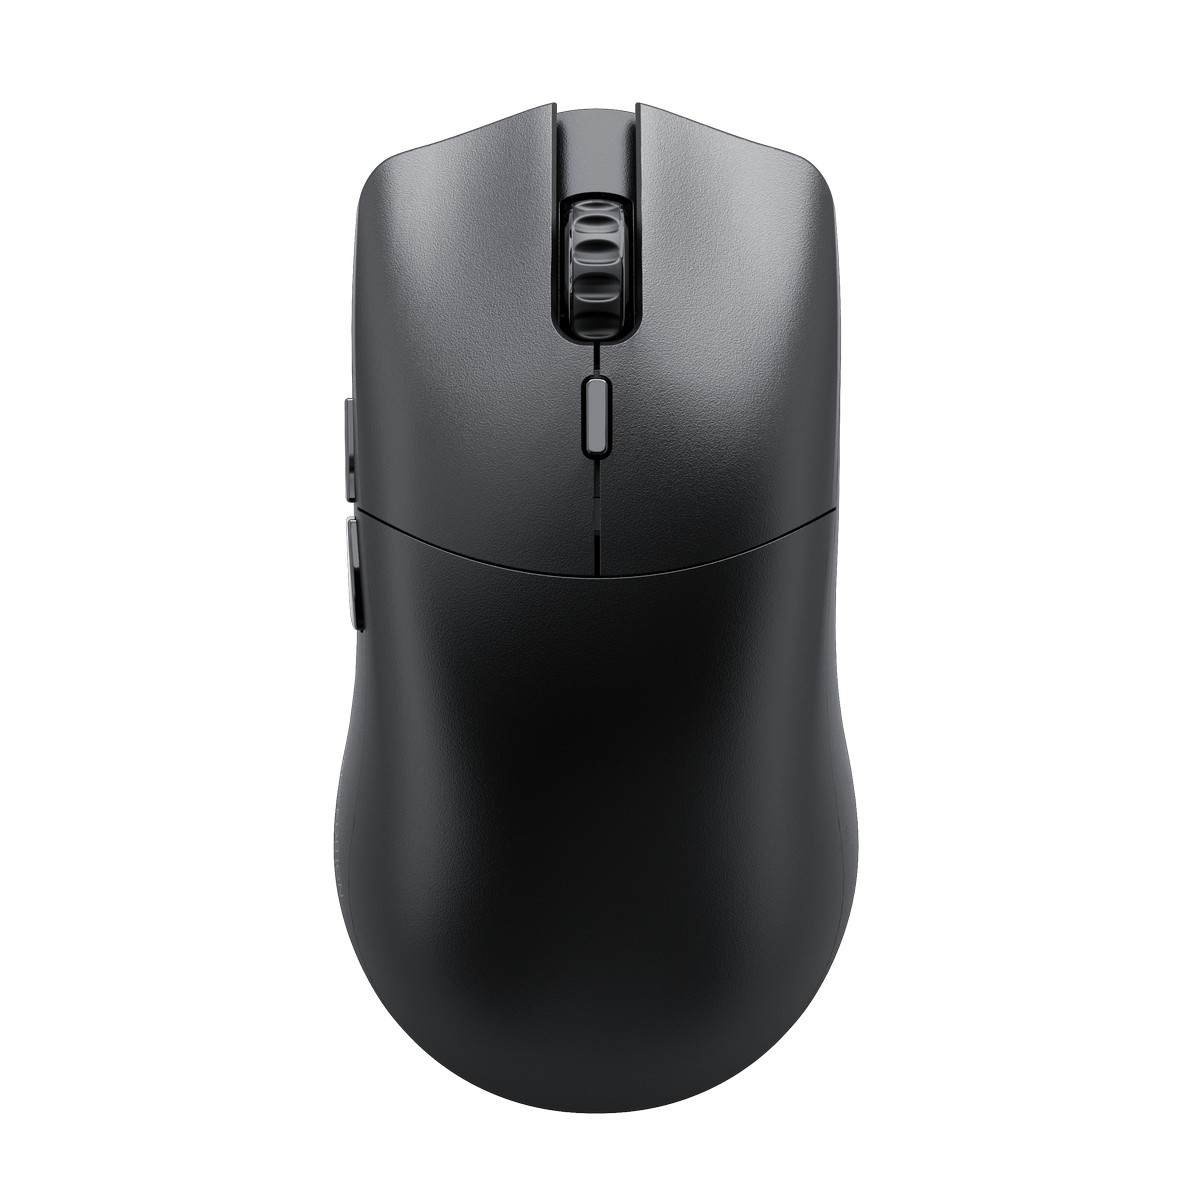 Glorious Model O 2 PRO 1K Polling Wireless RGB Gaming Mouse - Black